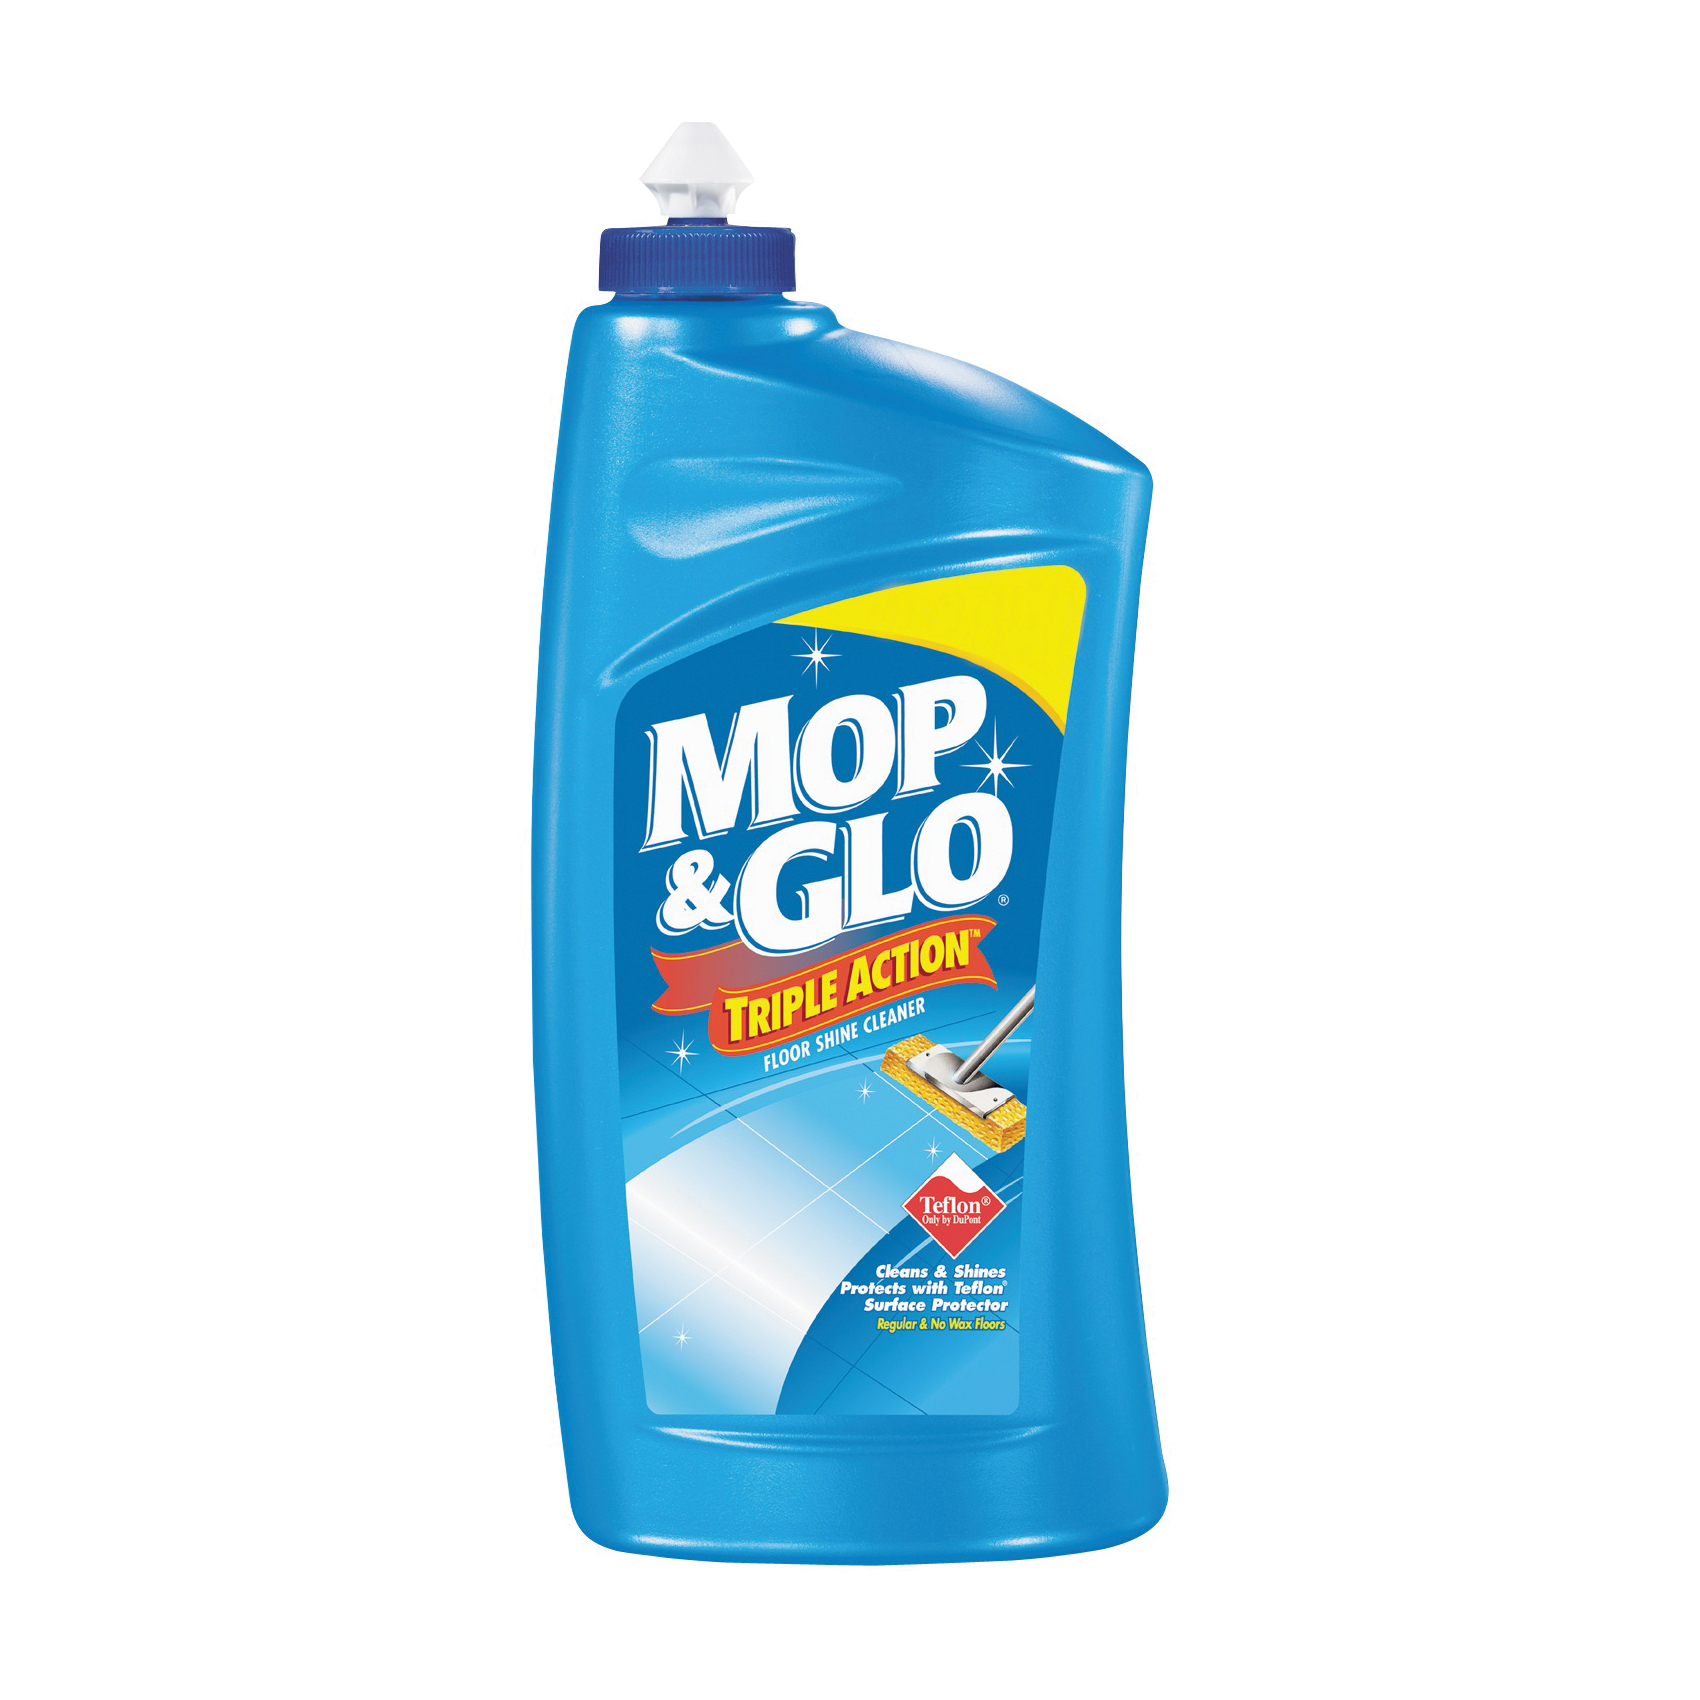 Mop Glo 1920089333 Home Hardware Center, Mop And Glo For Hardwood Floors